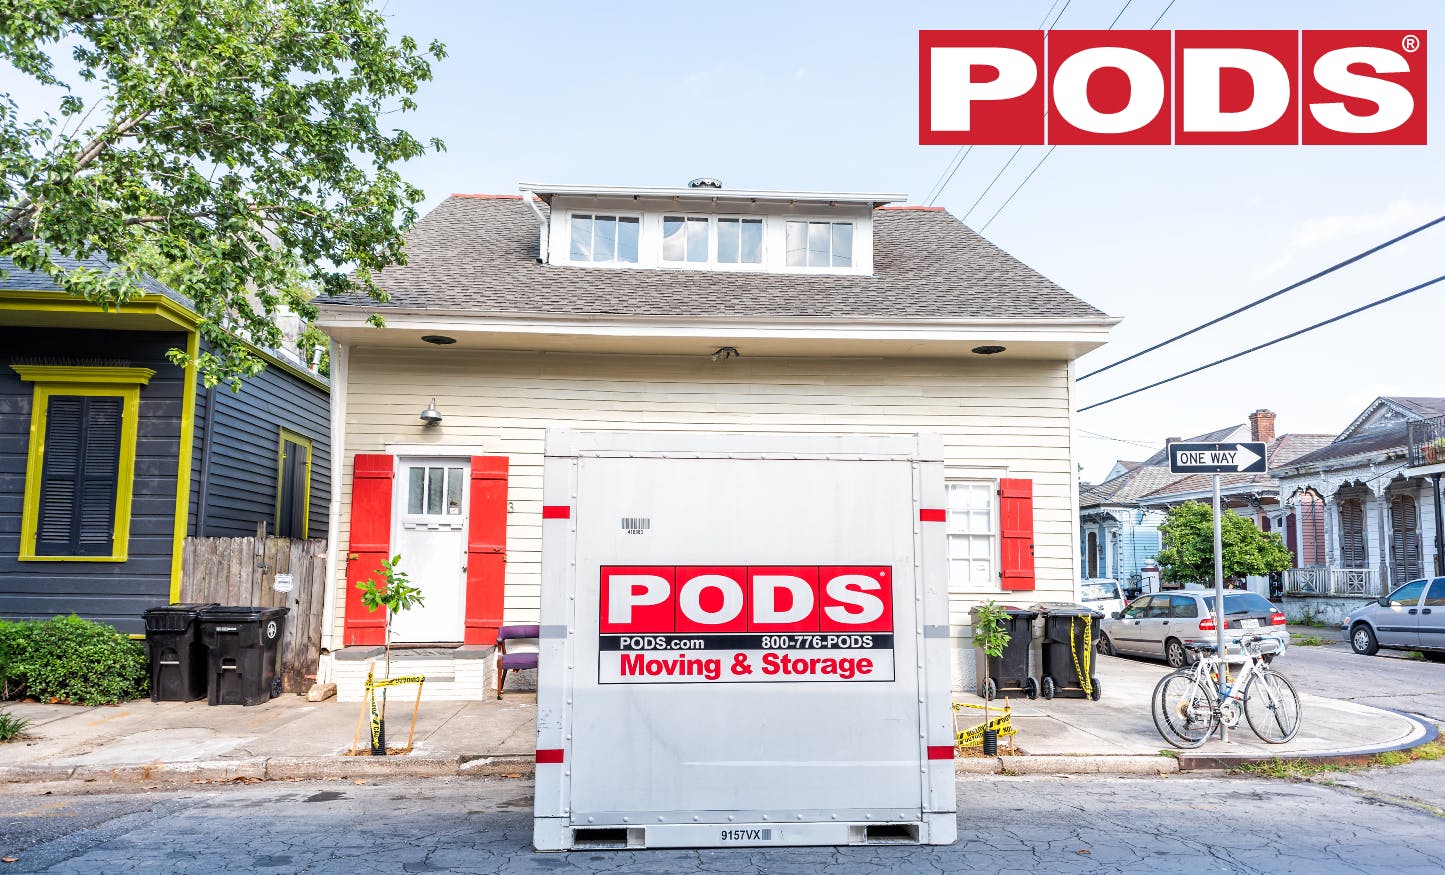 PODS: Storage and Moving Services Full Review